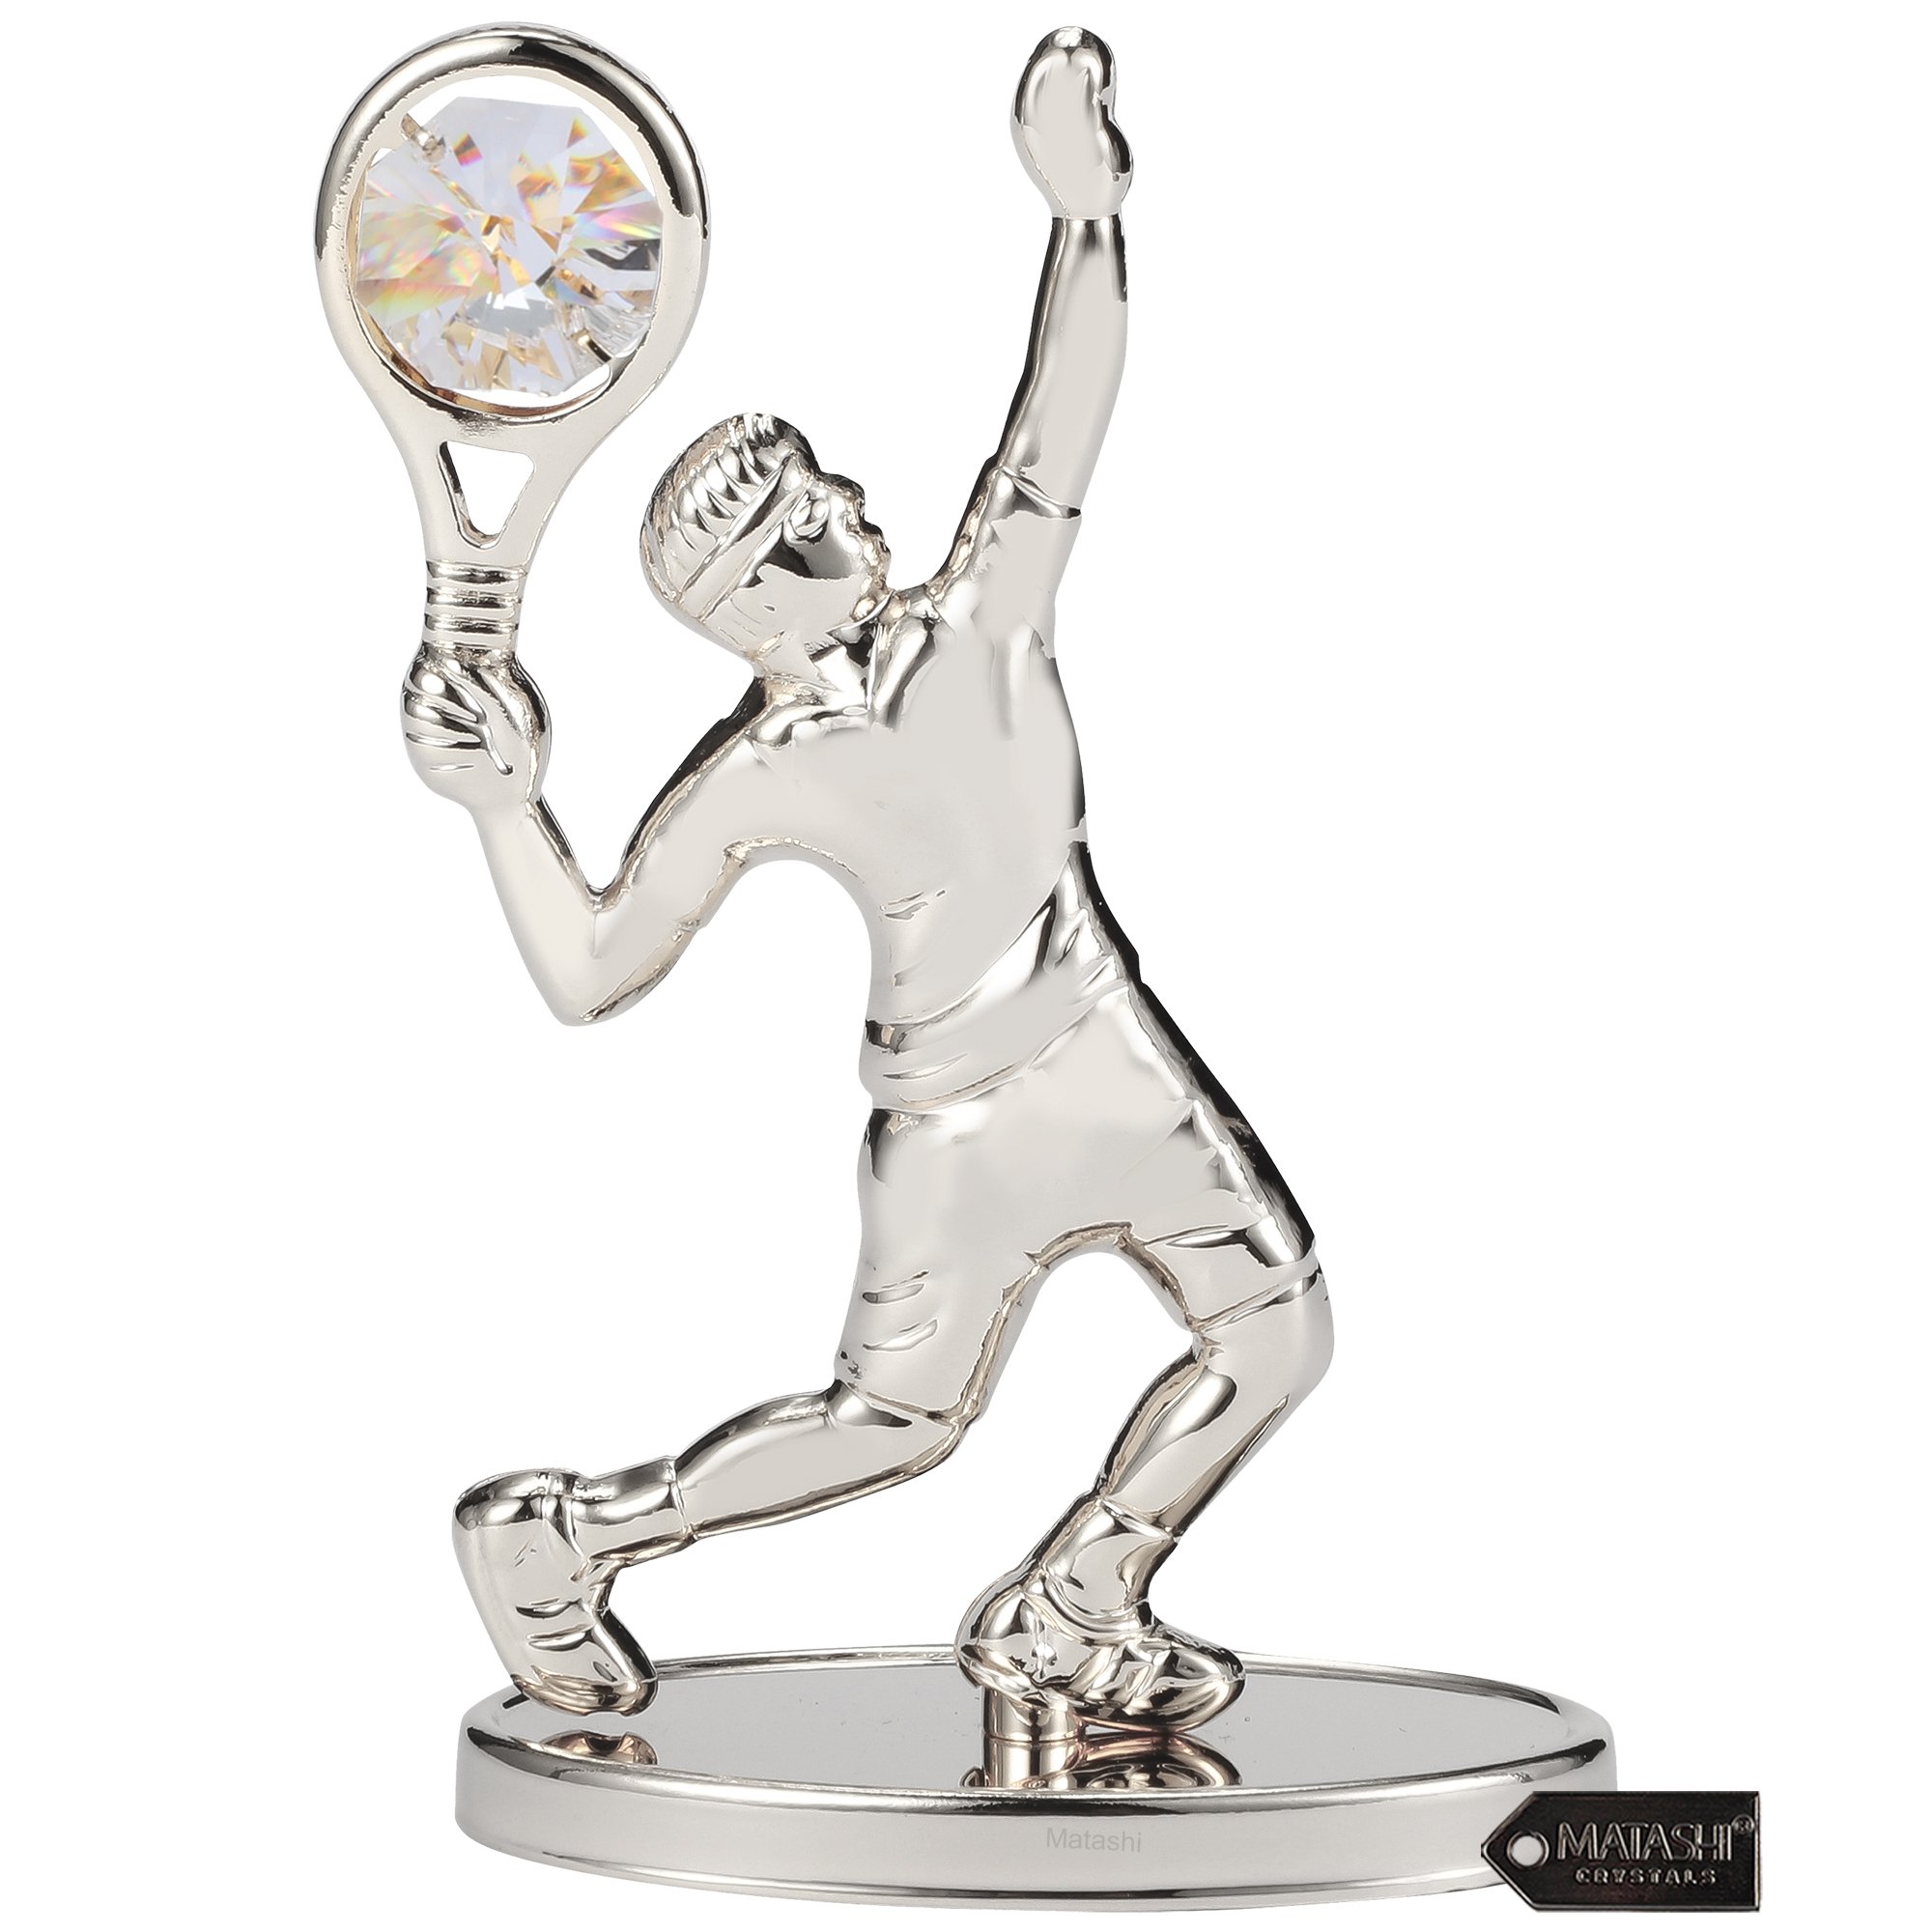 Matashi Silver Plated Tennis Player Figurine Embellished With Crystals, Gift For Sports Fan, Desk Accessories, Trophy, Office Decor